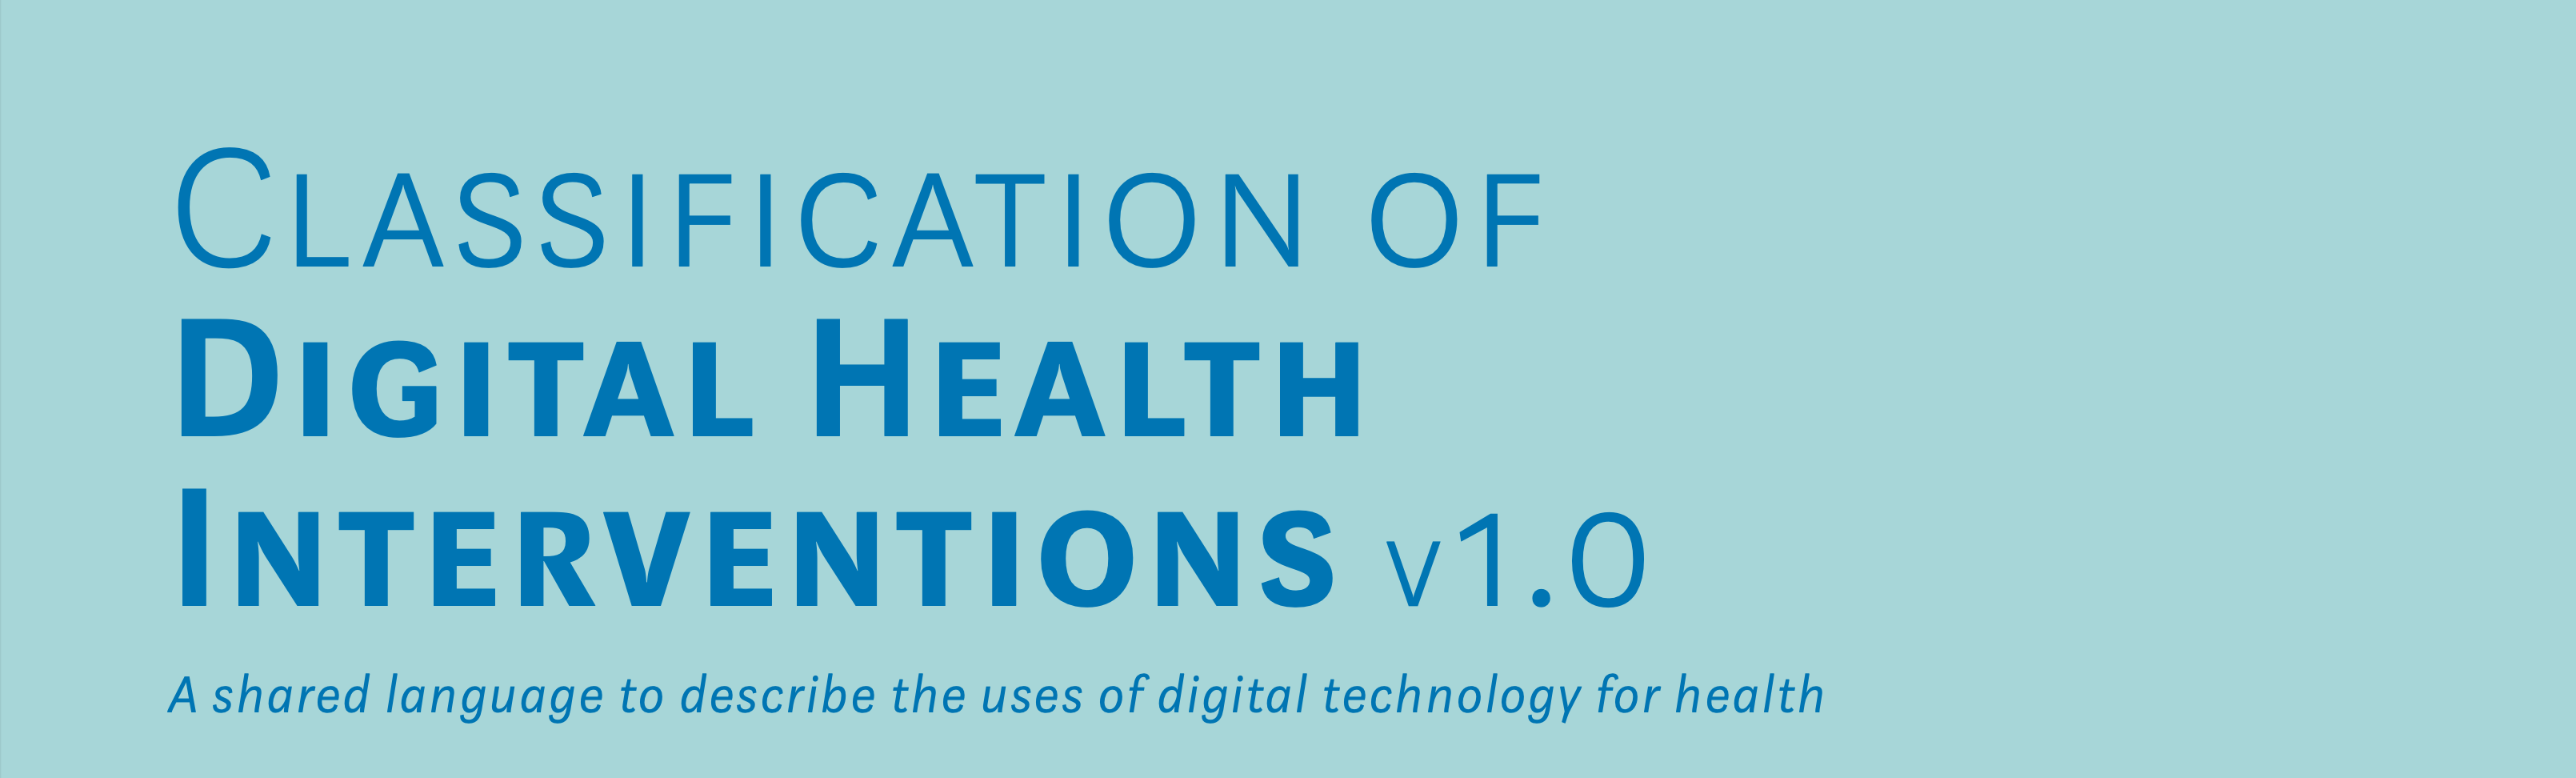 WHO Classifications of Digital Health Interventions 1.0